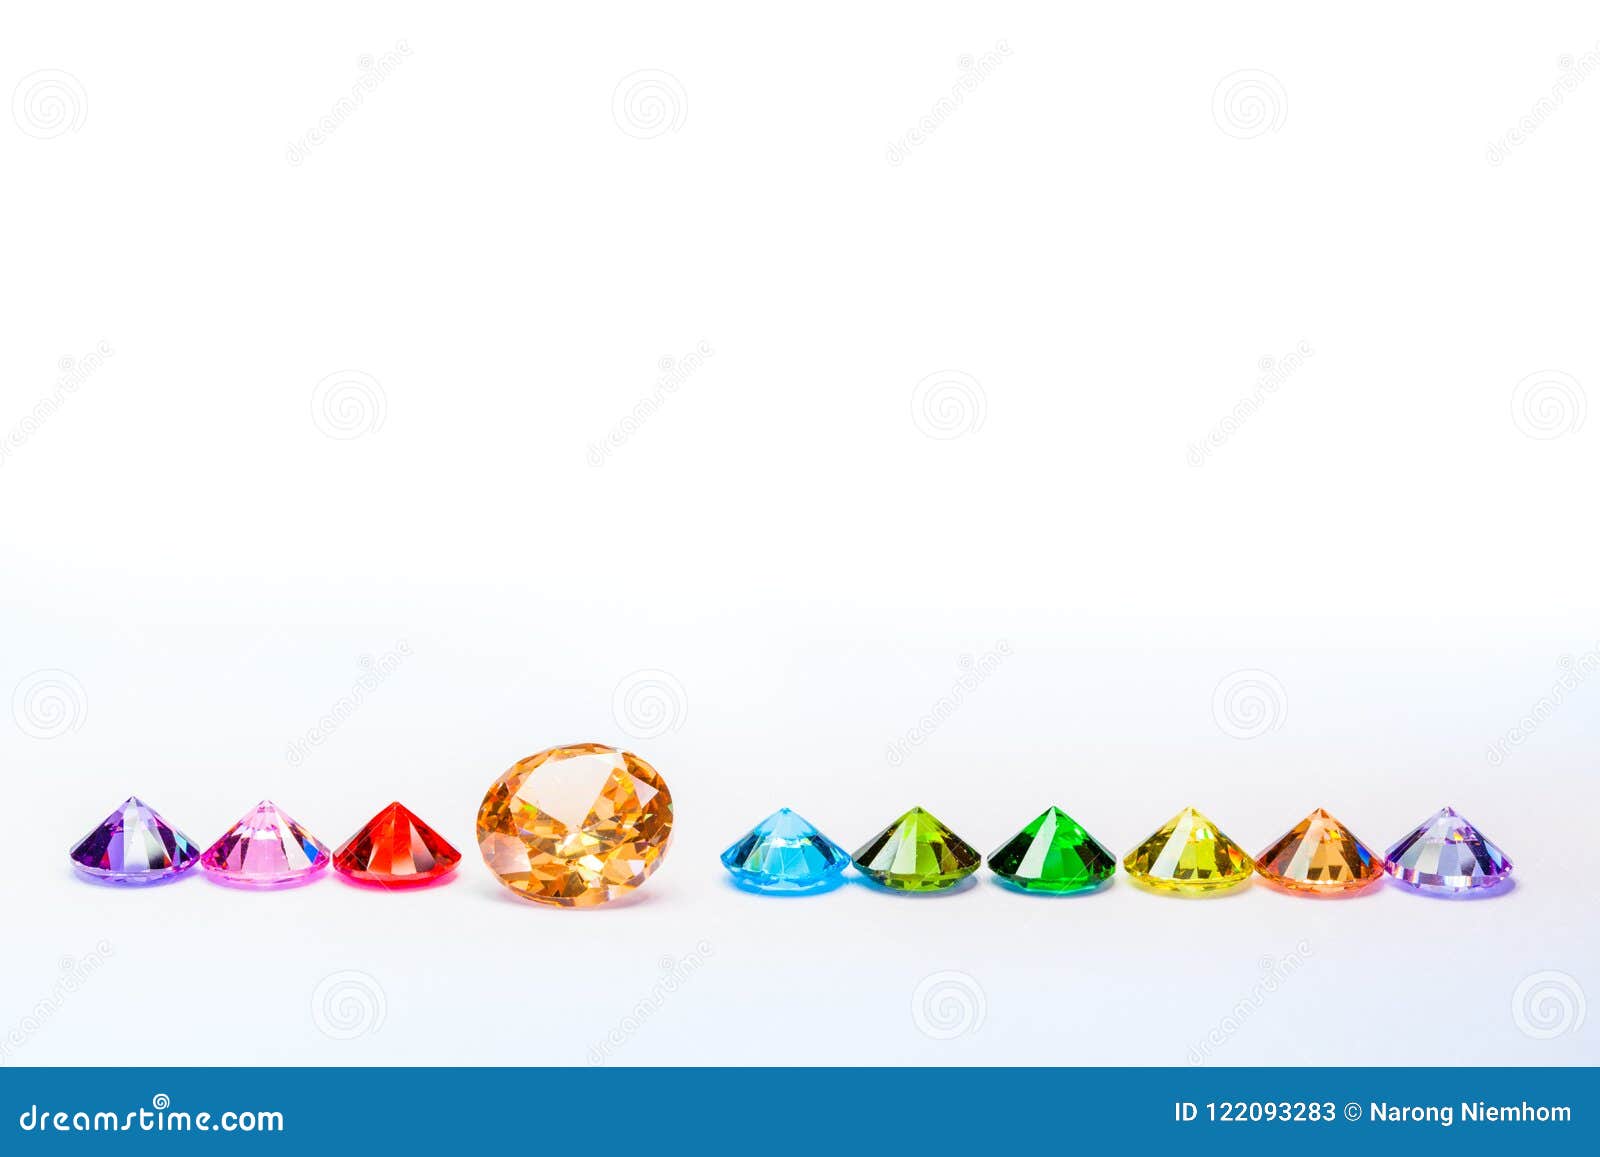 Colorful Diamonds In White Background Stock Image Image Of Background